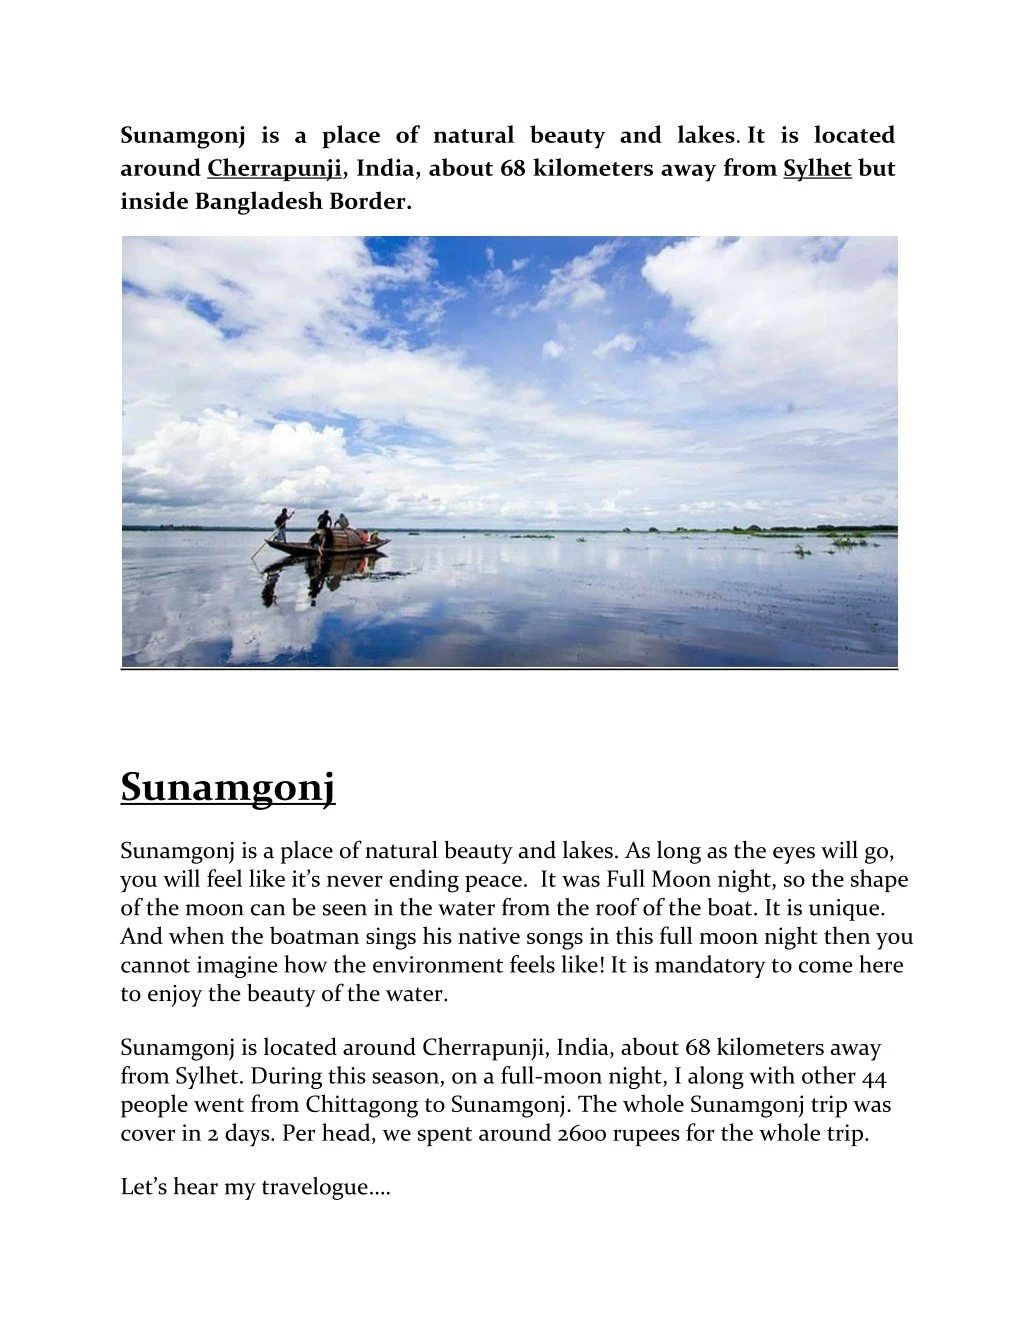 sunamgonj is a place of natural beauty and lakes